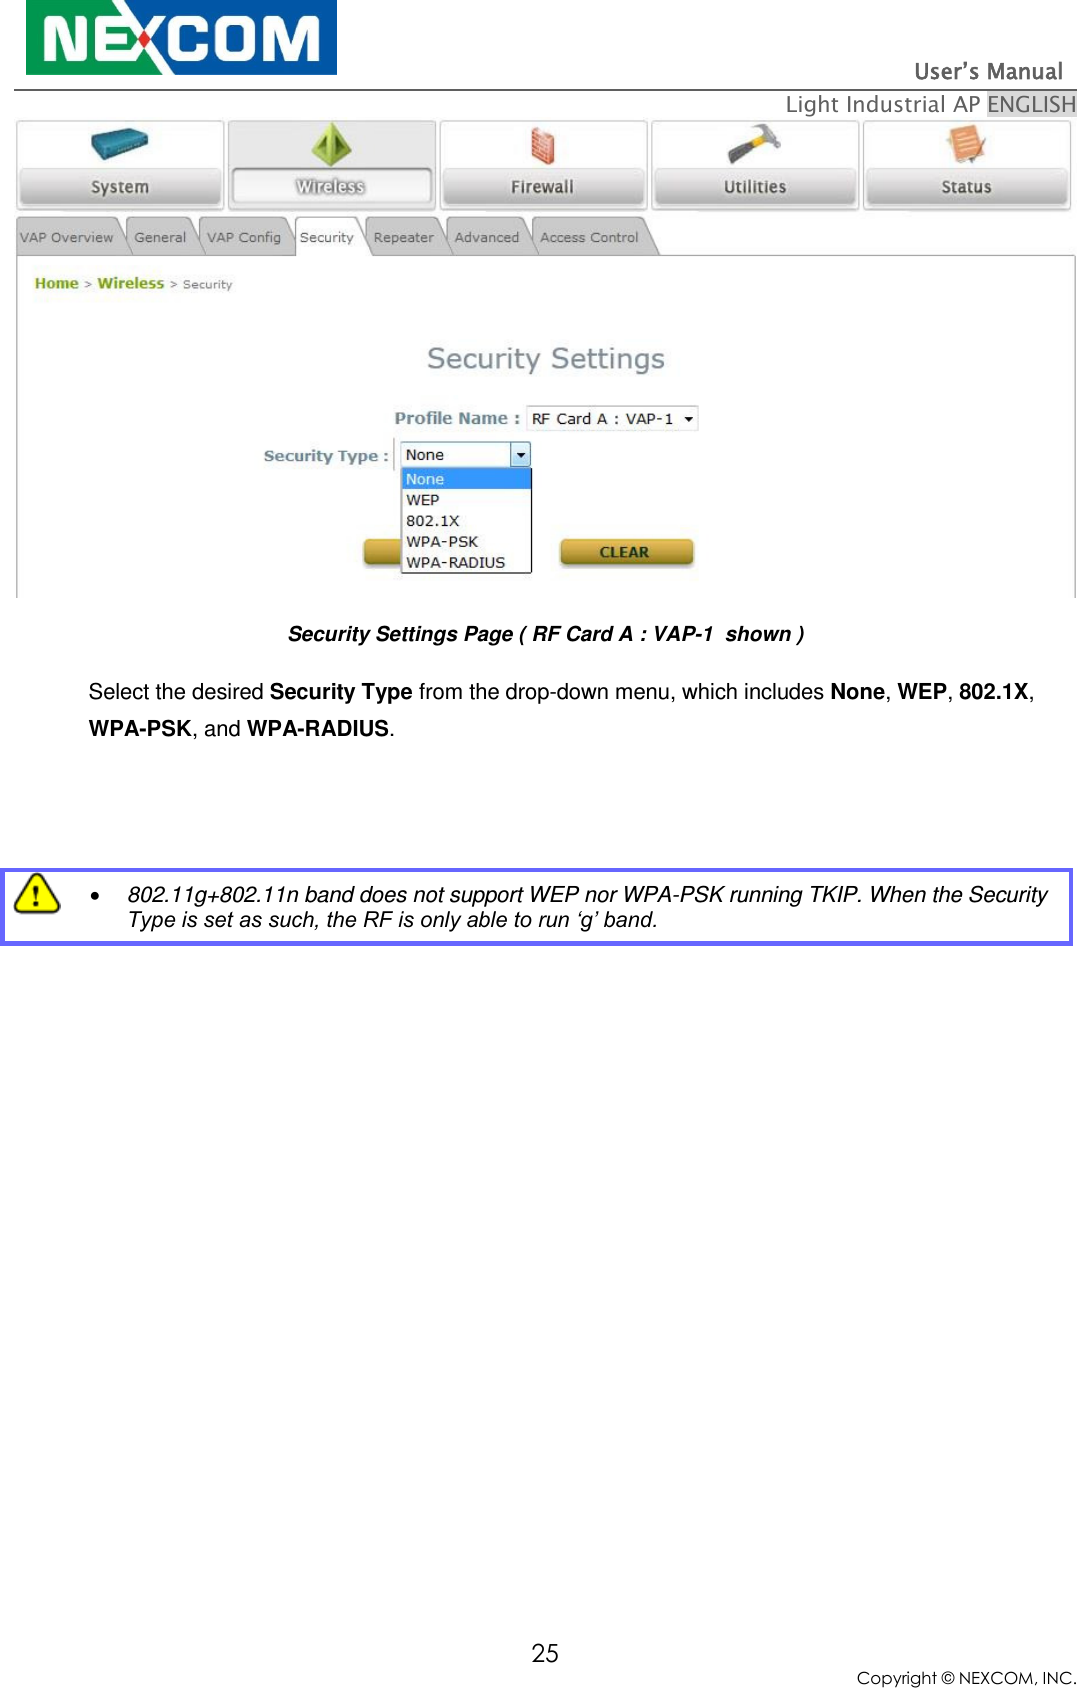                                                                          User’s Manual   Light Industrial AP ENGLISH 25 Copyright © NEXCOM, INC.  Security Settings Page ( RF Card A : VAP-1  shown ) Select the desired Security Type from the drop-down menu, which includes None, WEP, 802.1X, WPA-PSK, and WPA-RADIUS.         802.11g+802.11n band does not support WEP nor WPA-PSK running TKIP. When the Security Type is set as such, the RF is only able to run ‘g’ band. 